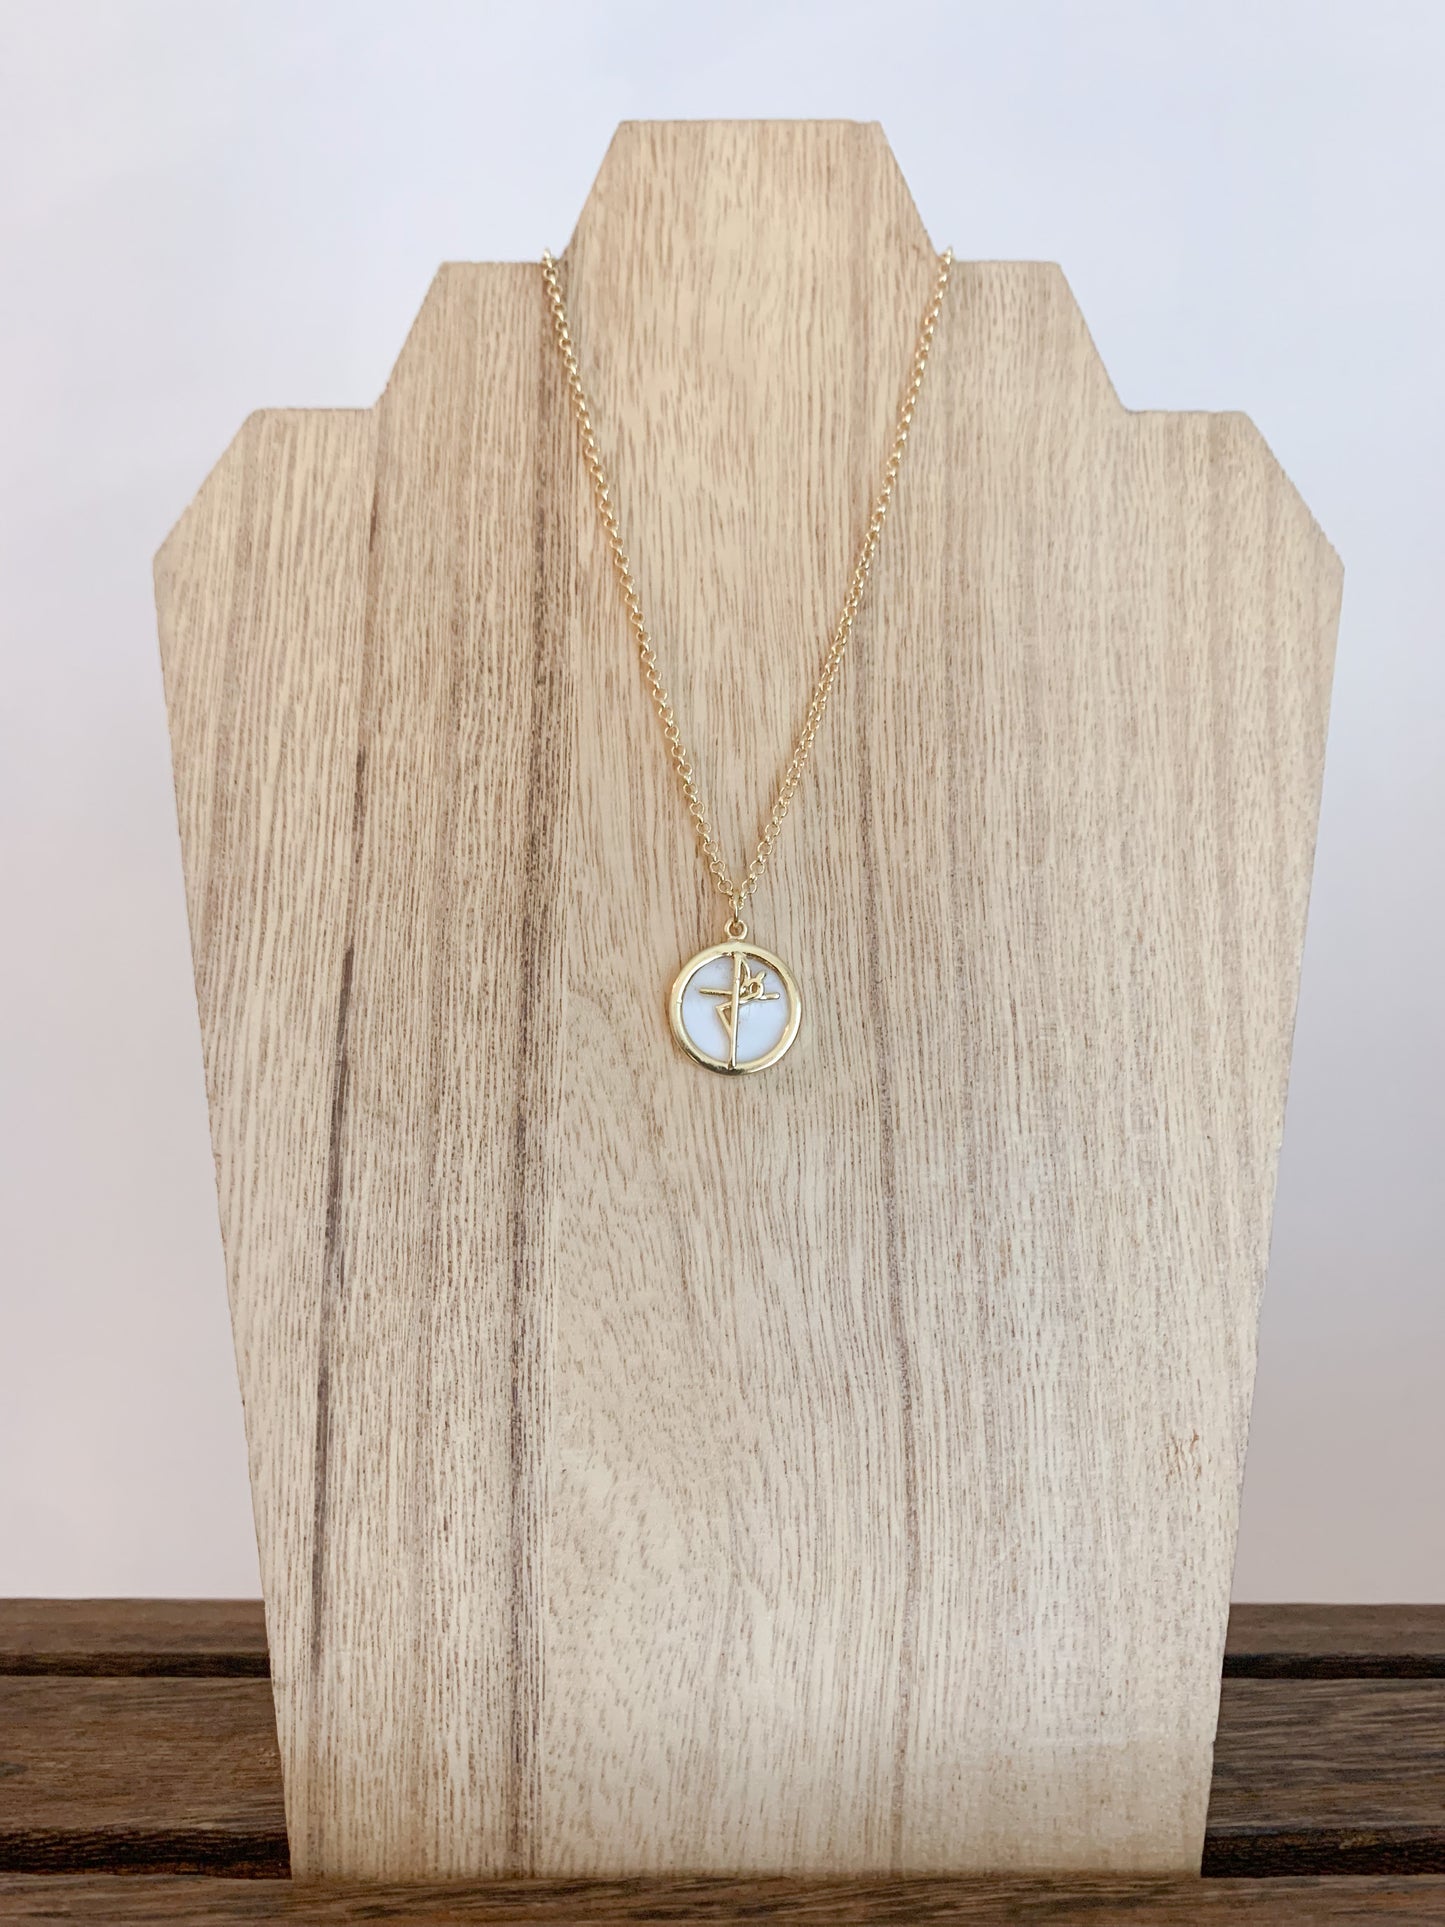 18k gold plated necklace adorned with an enamel pendant with the Sign of Faith